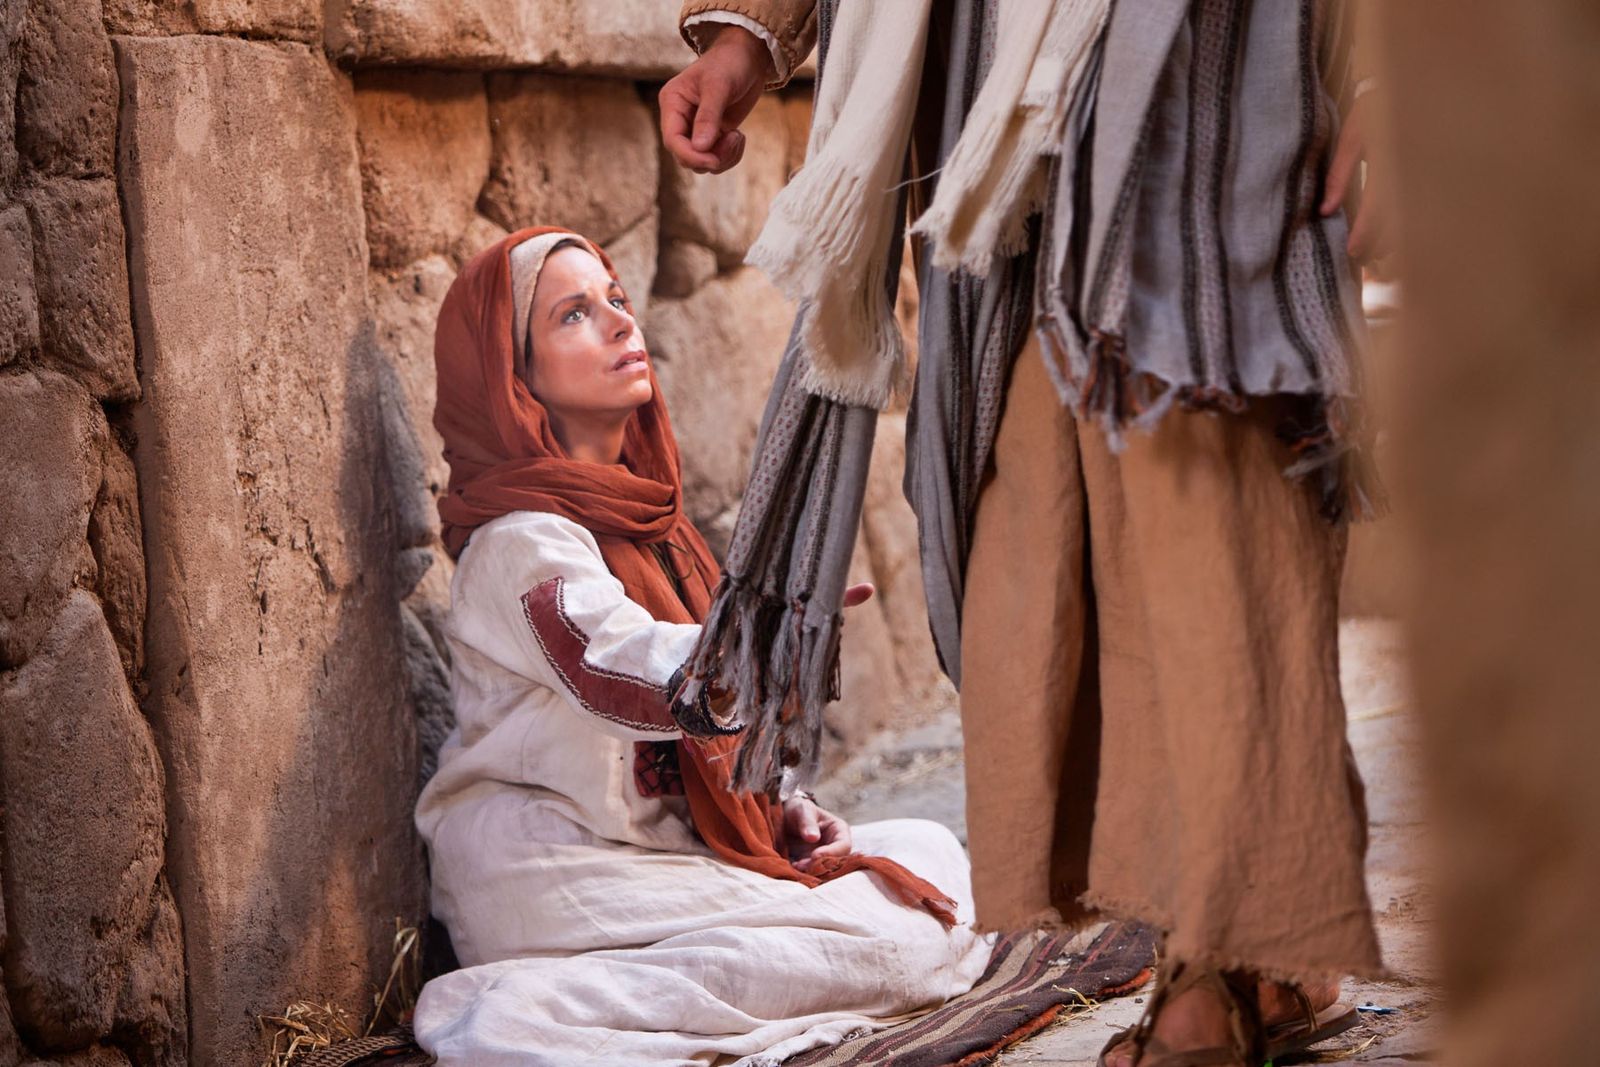 A woman with an issue of blood touches the clothes of Jesus.